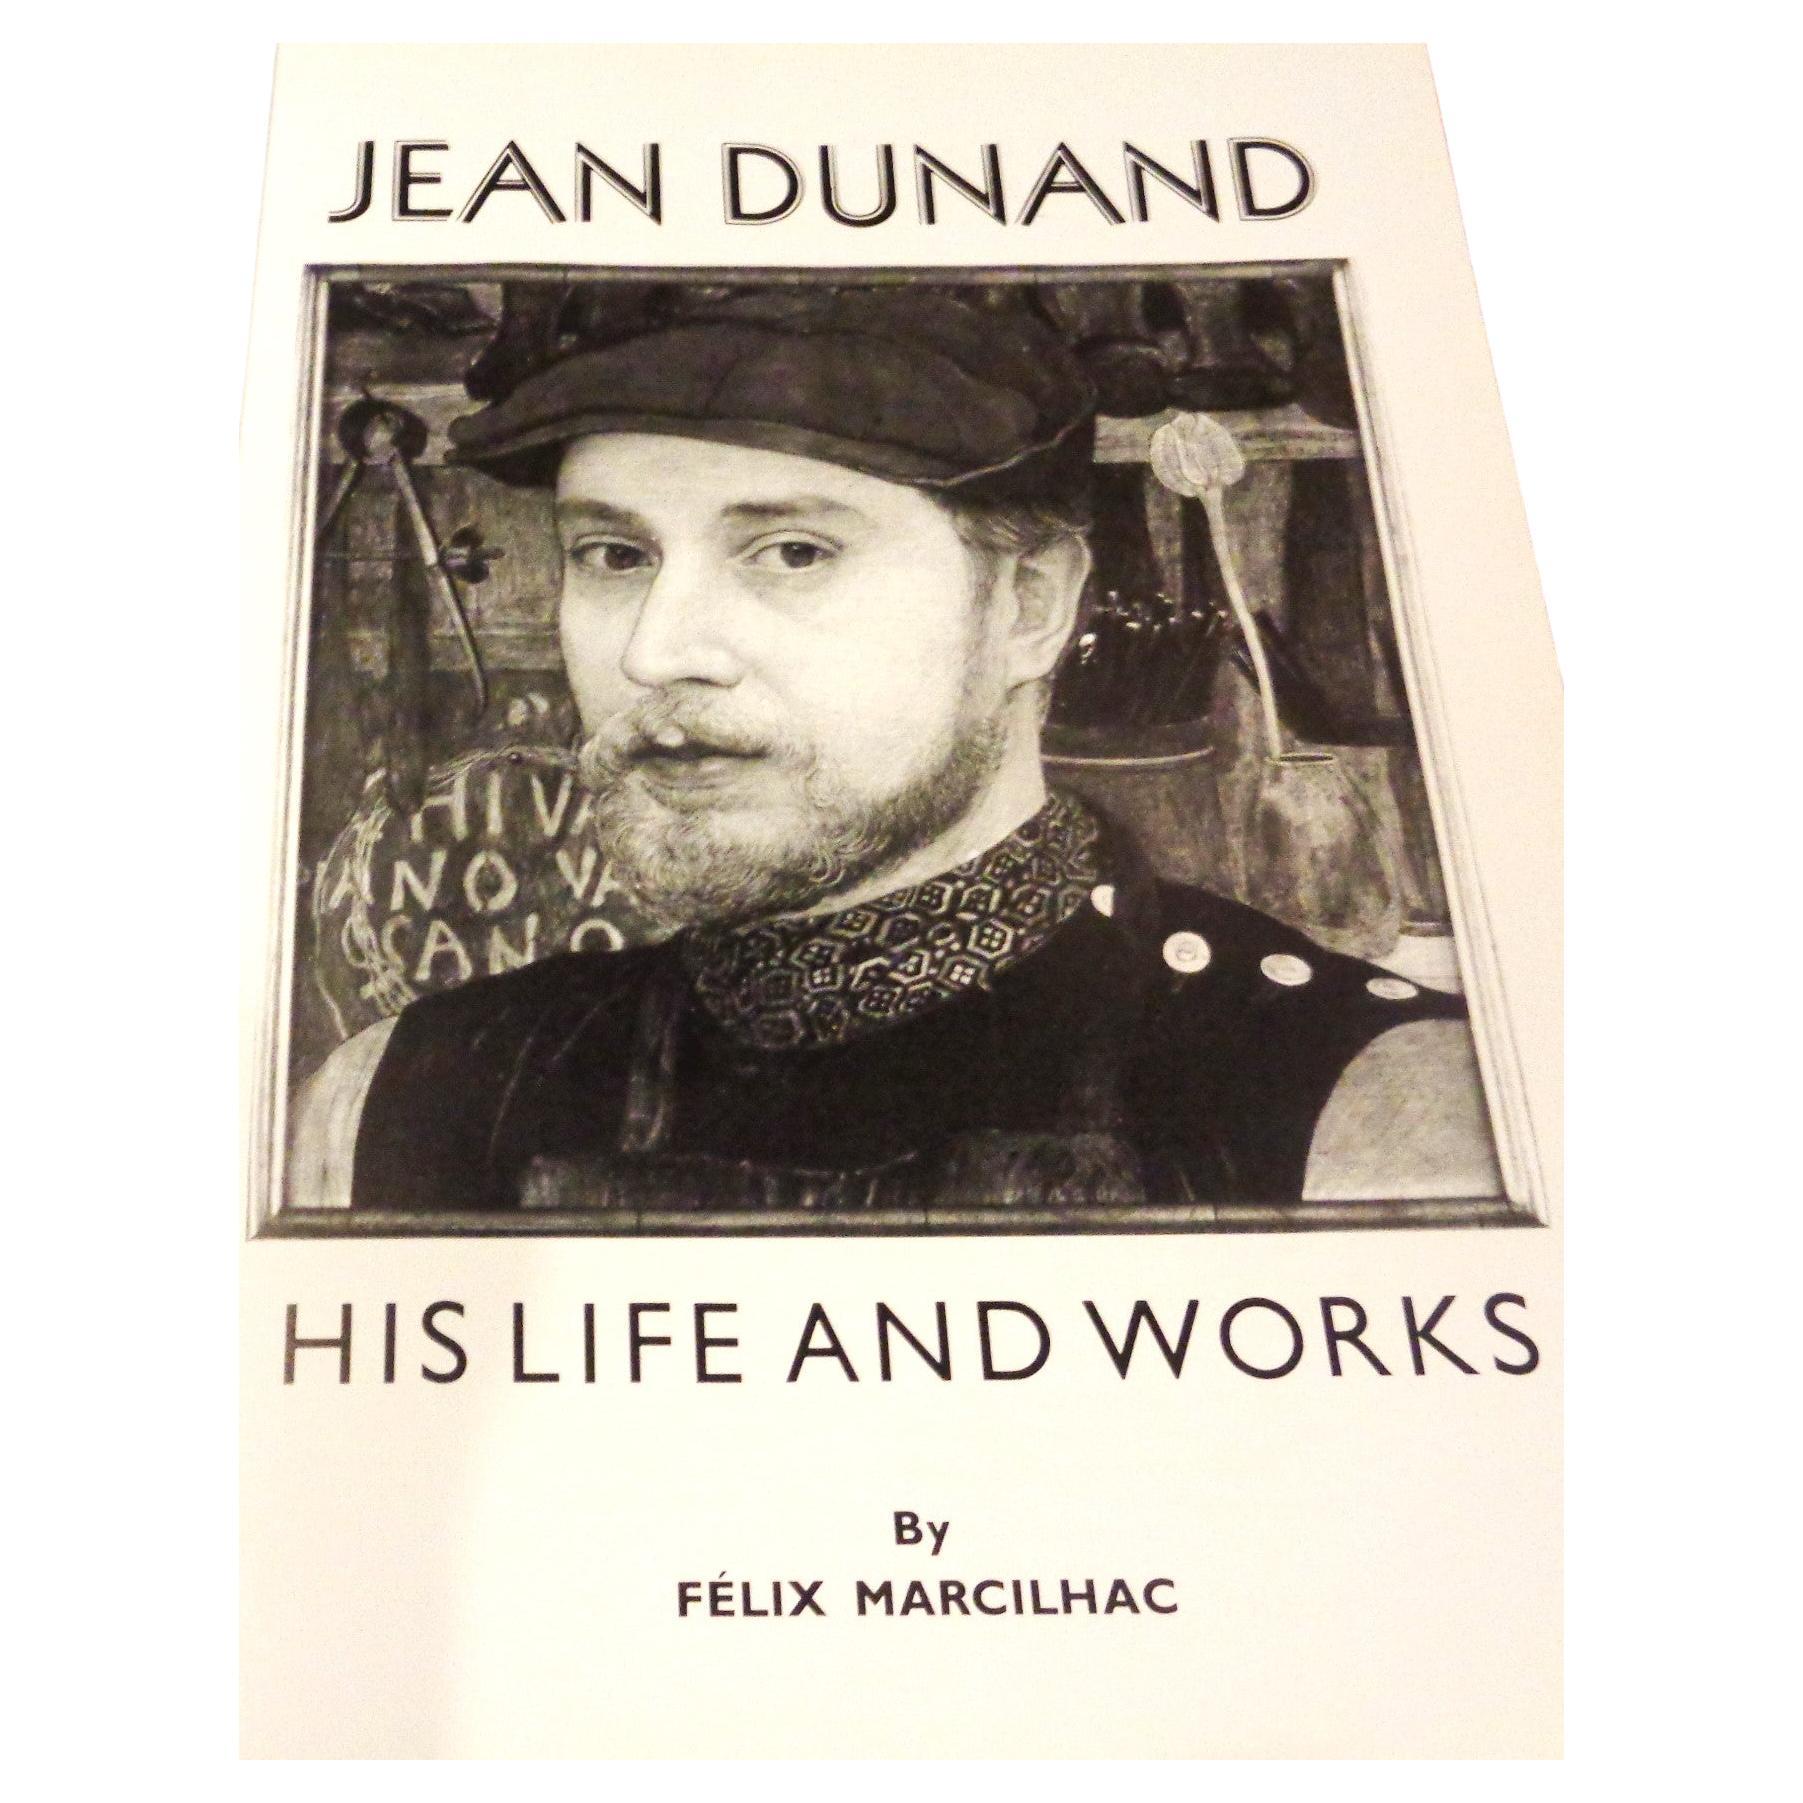 Late 20th Century Jean Dunand - His Life and Works - Felix Marcilhac, 1991 Abrams